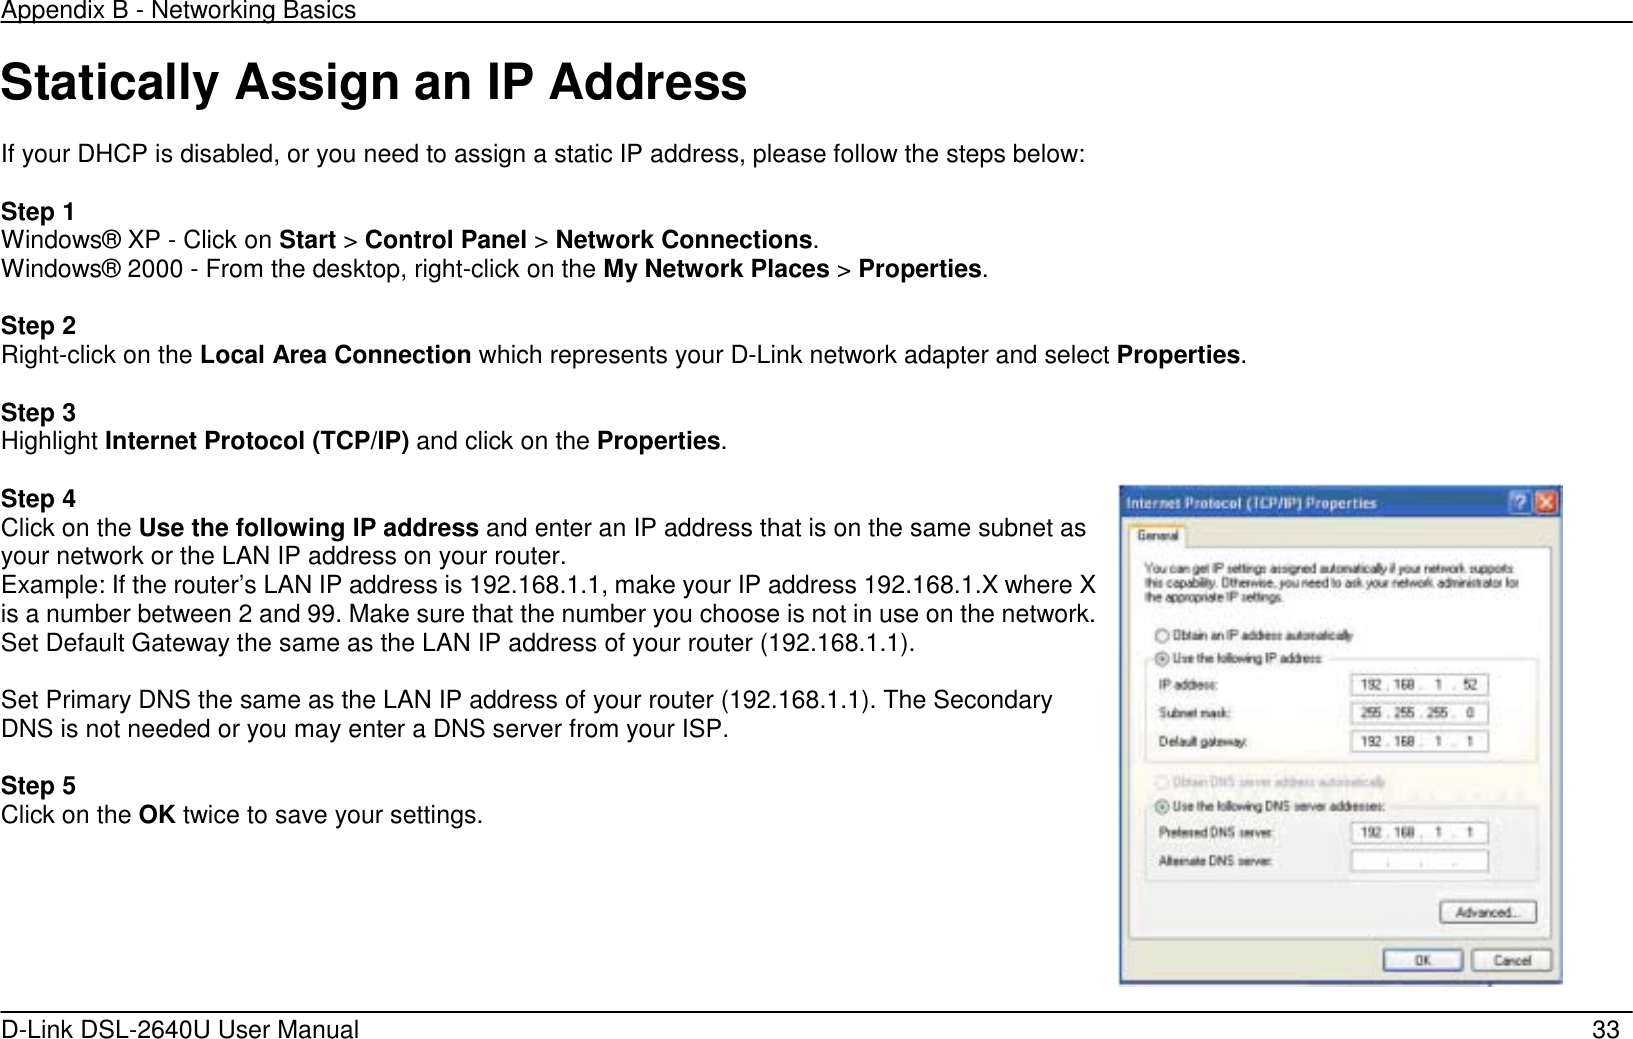 Appendix B - Networking Basics   D-Link DSL-2640U User Manual    33 Statically Assign an IP Address  If your DHCP is disabled, or you need to assign a static IP address, please follow the steps below:  Step 1 Windows® XP - Click on Start &gt; Control Panel &gt; Network Connections. Windows® 2000 - From the desktop, right-click on the My Network Places &gt; Properties.  Step 2 Right-click on the Local Area Connection which represents your D-Link network adapter and select Properties.  Step 3 Highlight Internet Protocol (TCP/IP) and click on the Properties.  Step 4 Click on the Use the following IP address and enter an IP address that is on the same subnet as your network or the LAN IP address on your router. Example: If the router’s LAN IP address is 192.168.1.1, make your IP address 192.168.1.X where X is a number between 2 and 99. Make sure that the number you choose is not in use on the network. Set Default Gateway the same as the LAN IP address of your router (192.168.1.1).  Set Primary DNS the same as the LAN IP address of your router (192.168.1.1). The Secondary DNS is not needed or you may enter a DNS server from your ISP.  Step 5 Click on the OK twice to save your settings.   